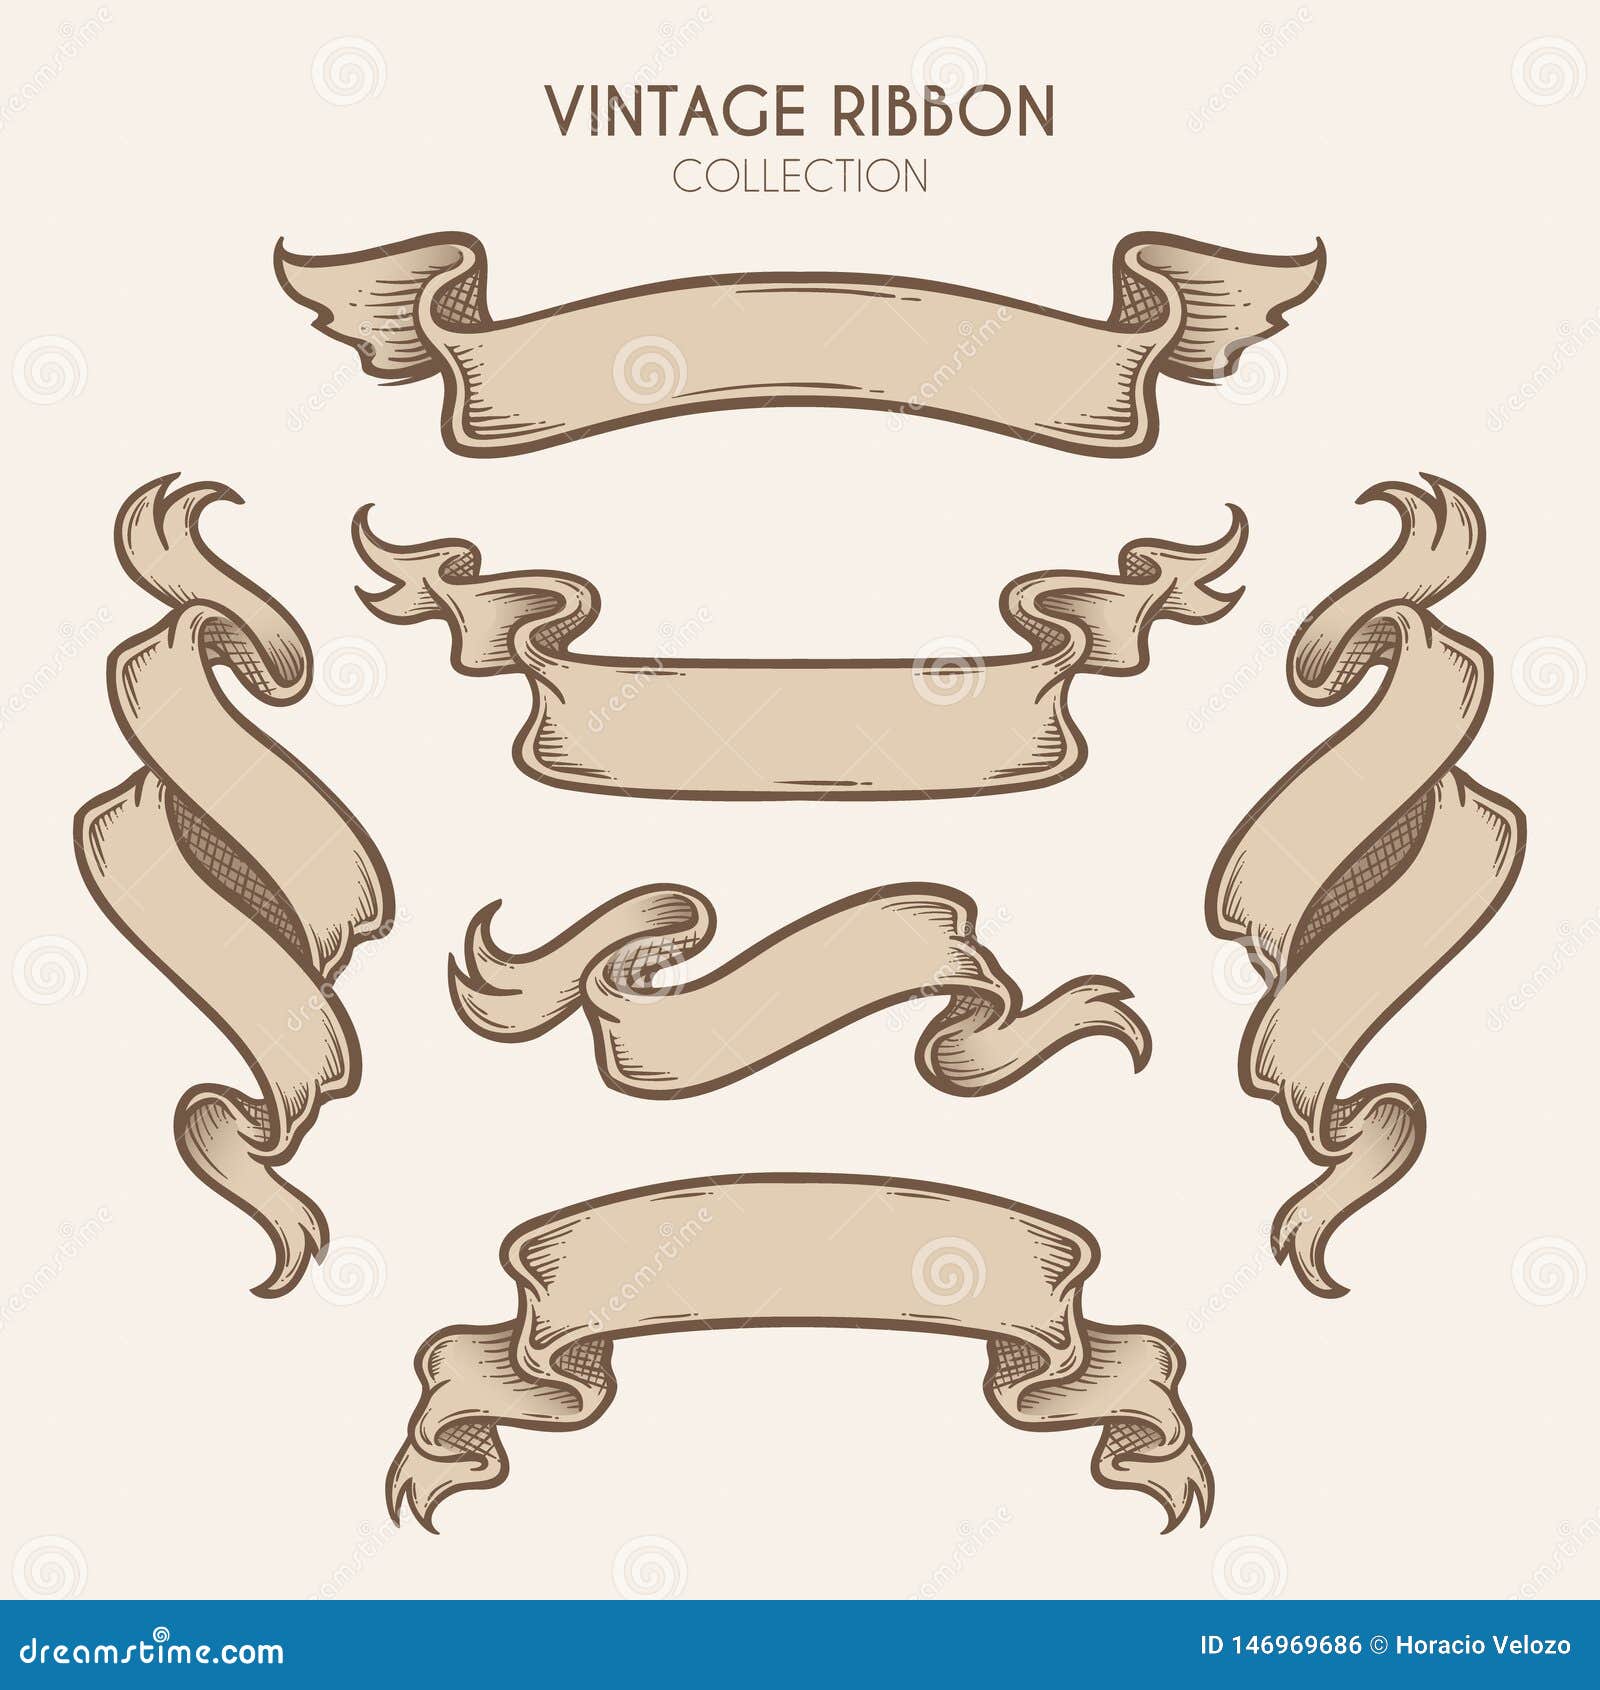 Hand Drawn Vintage Ribbon Collection Stock Vector - Illustration of banner,  sketch: 146969686